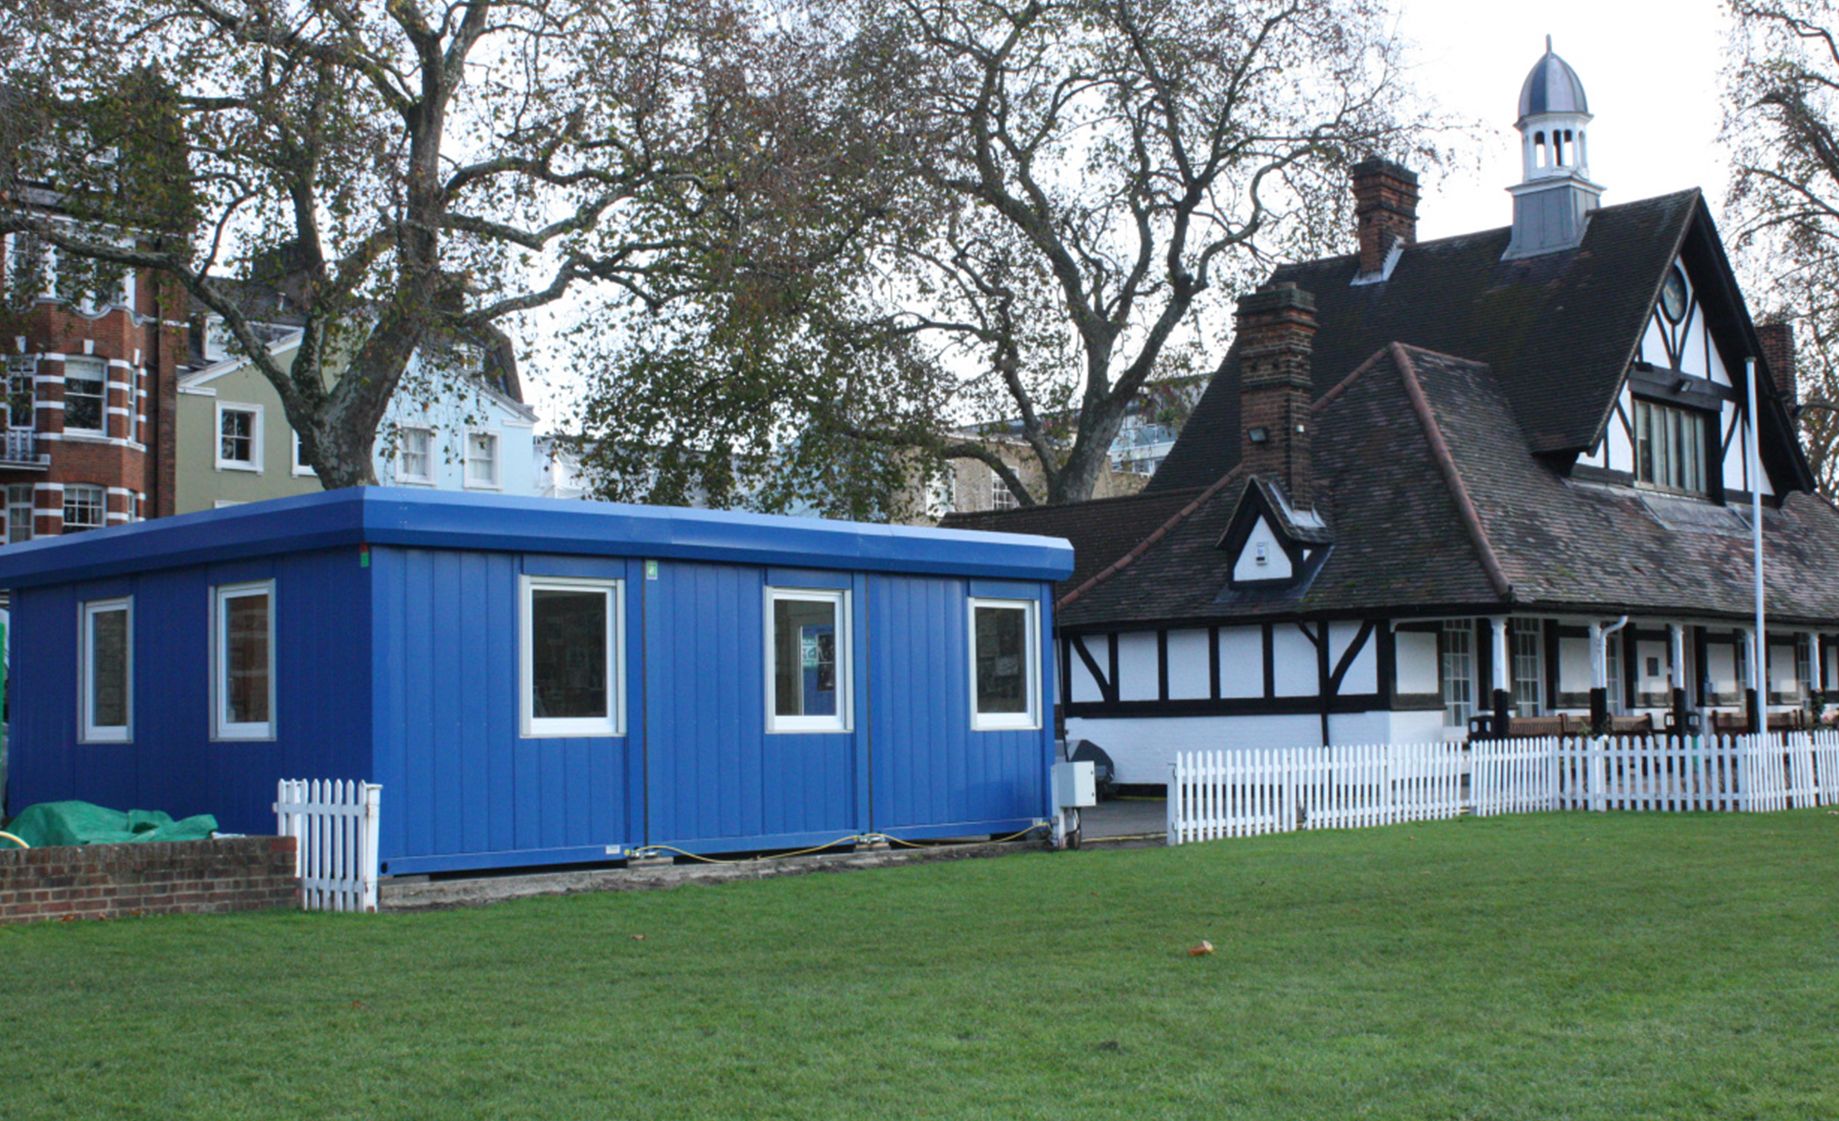 Sports clubs and changing rooms